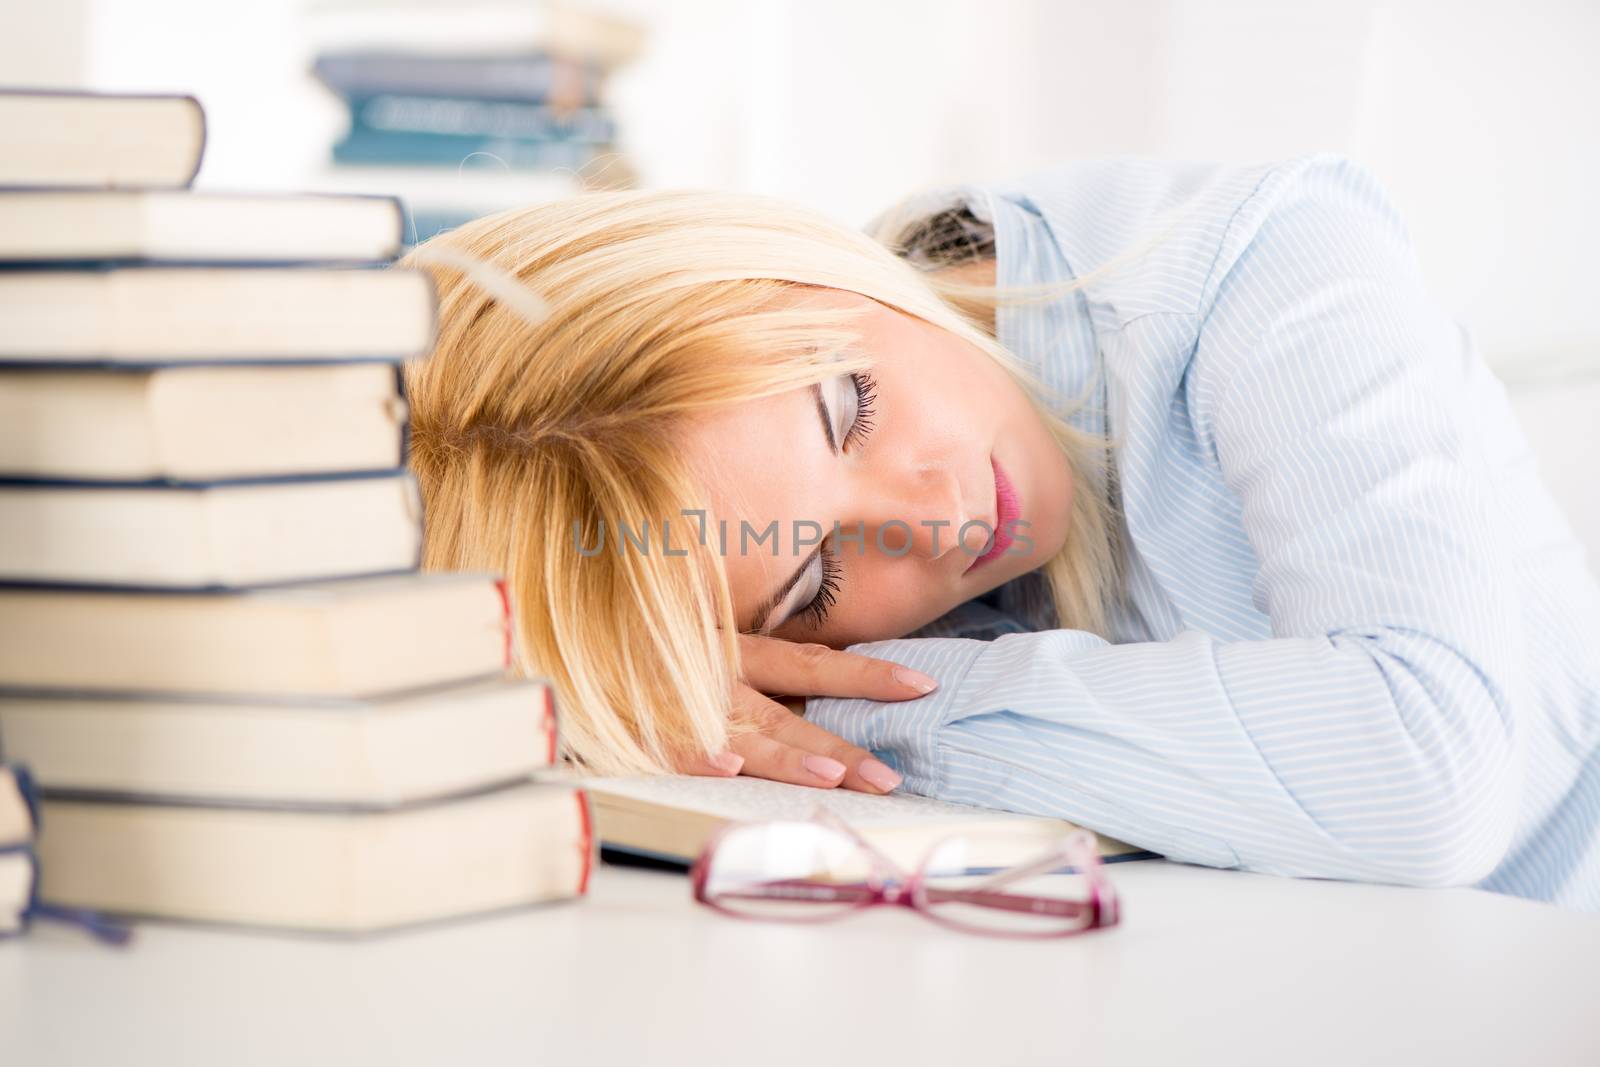 Tired Student by MilanMarkovic78